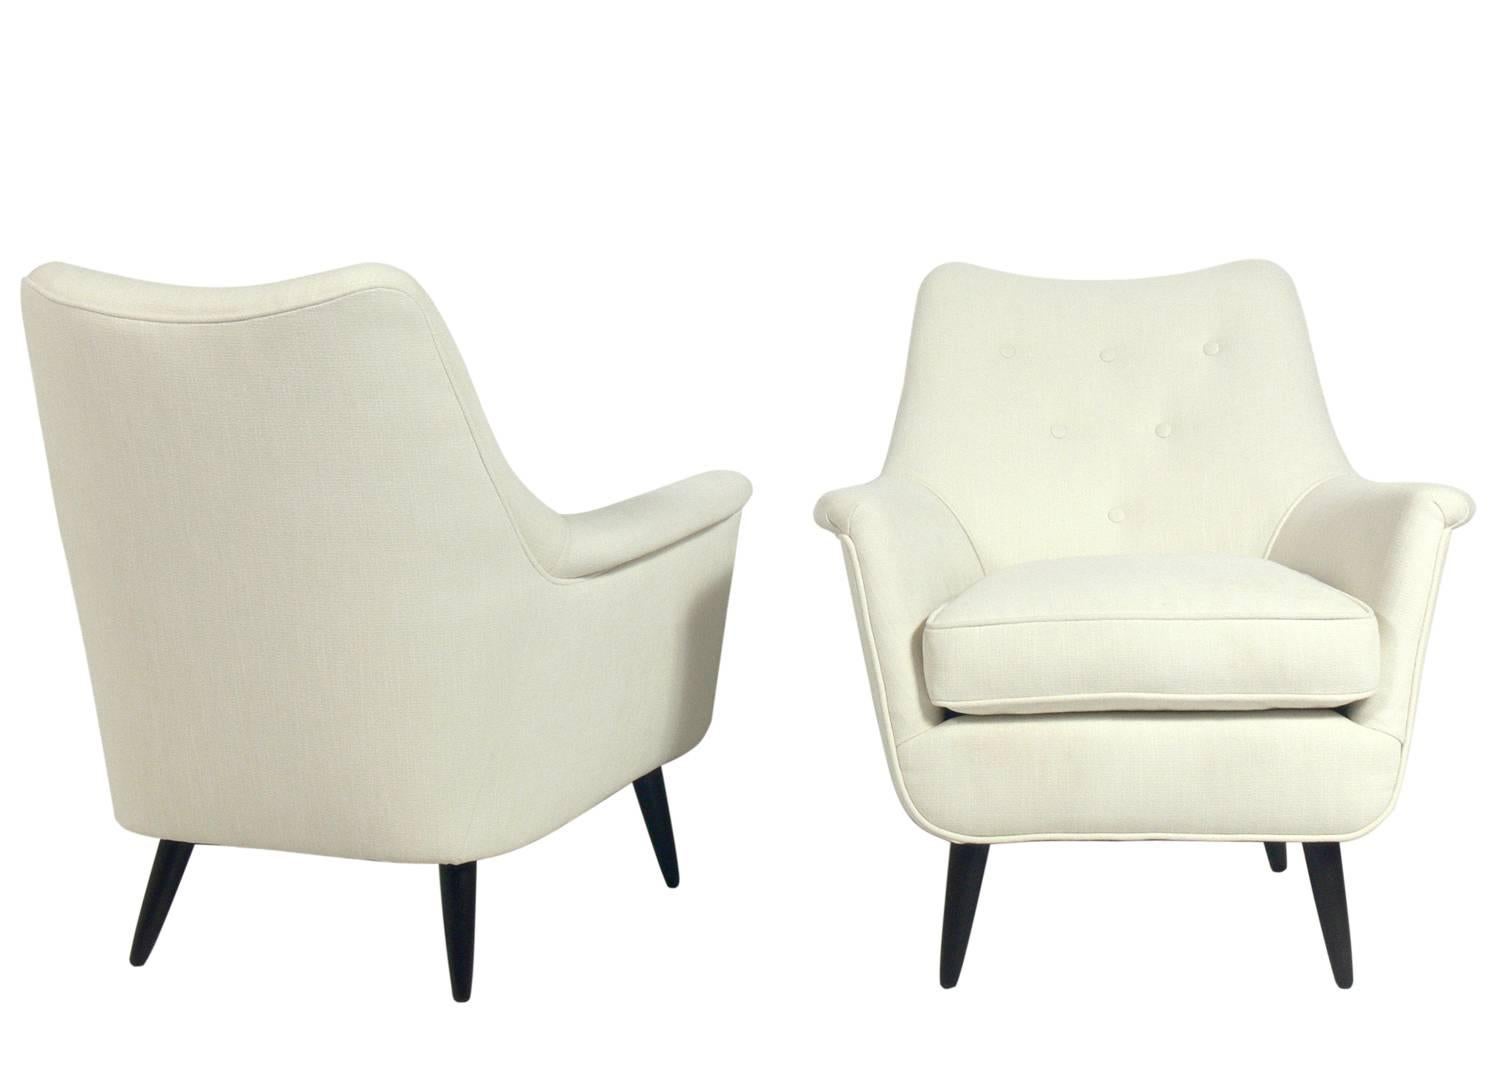 Mid-Century Modern Pair of Curvaceous Italian Lounge Chairs